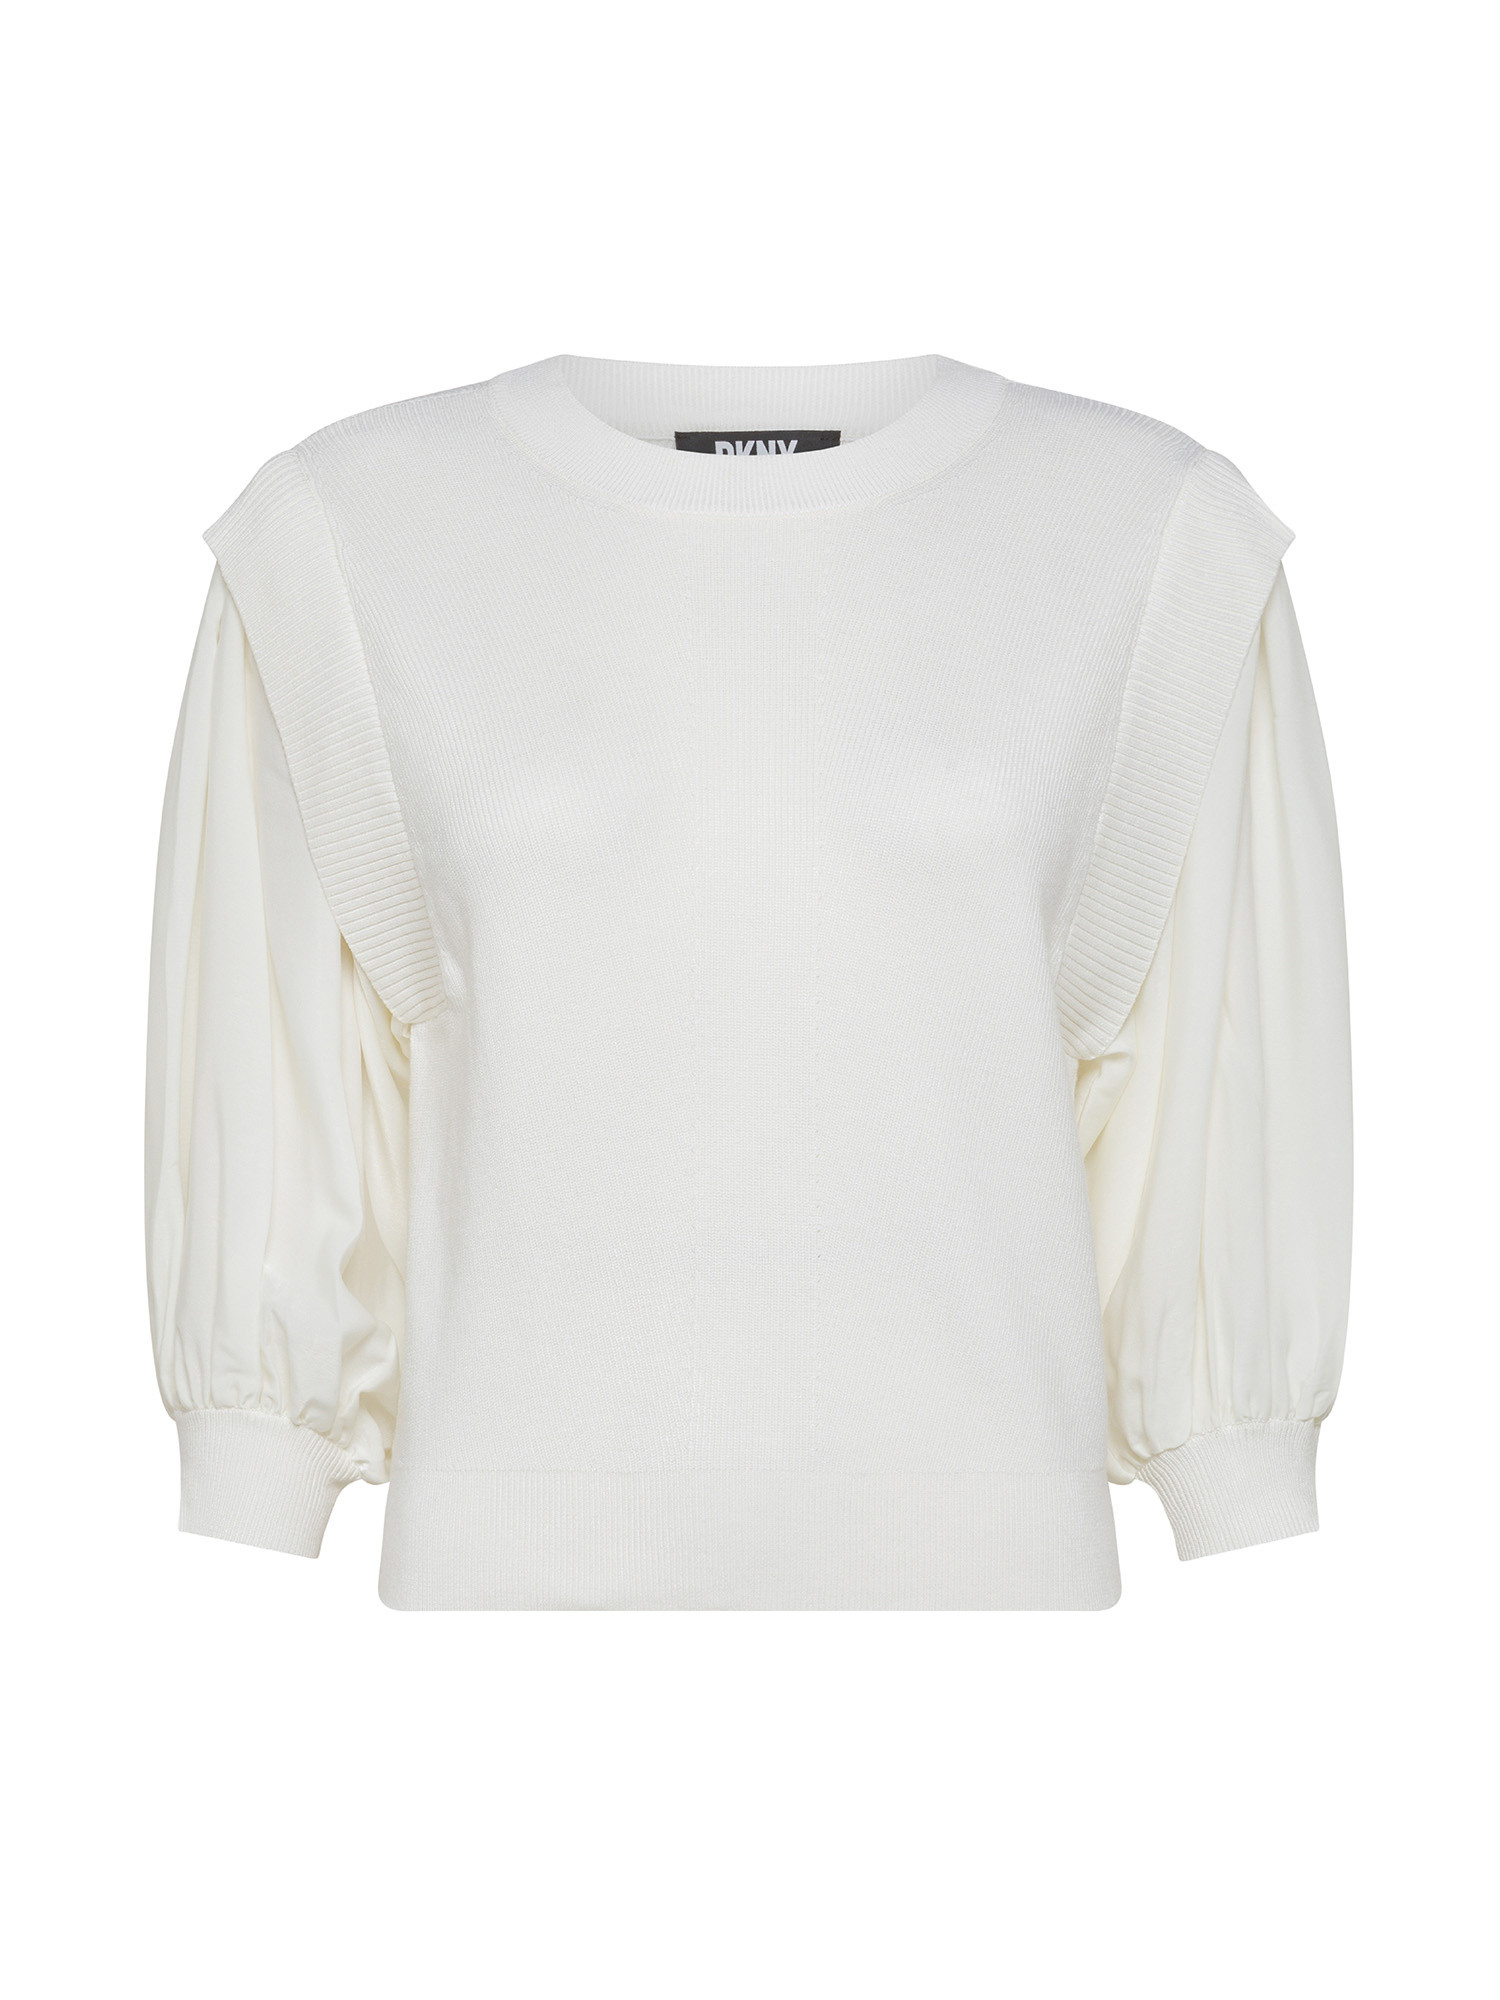 DKNY - Ribbed top with contrasting chiffon sleeve, White Ivory, large image number 0